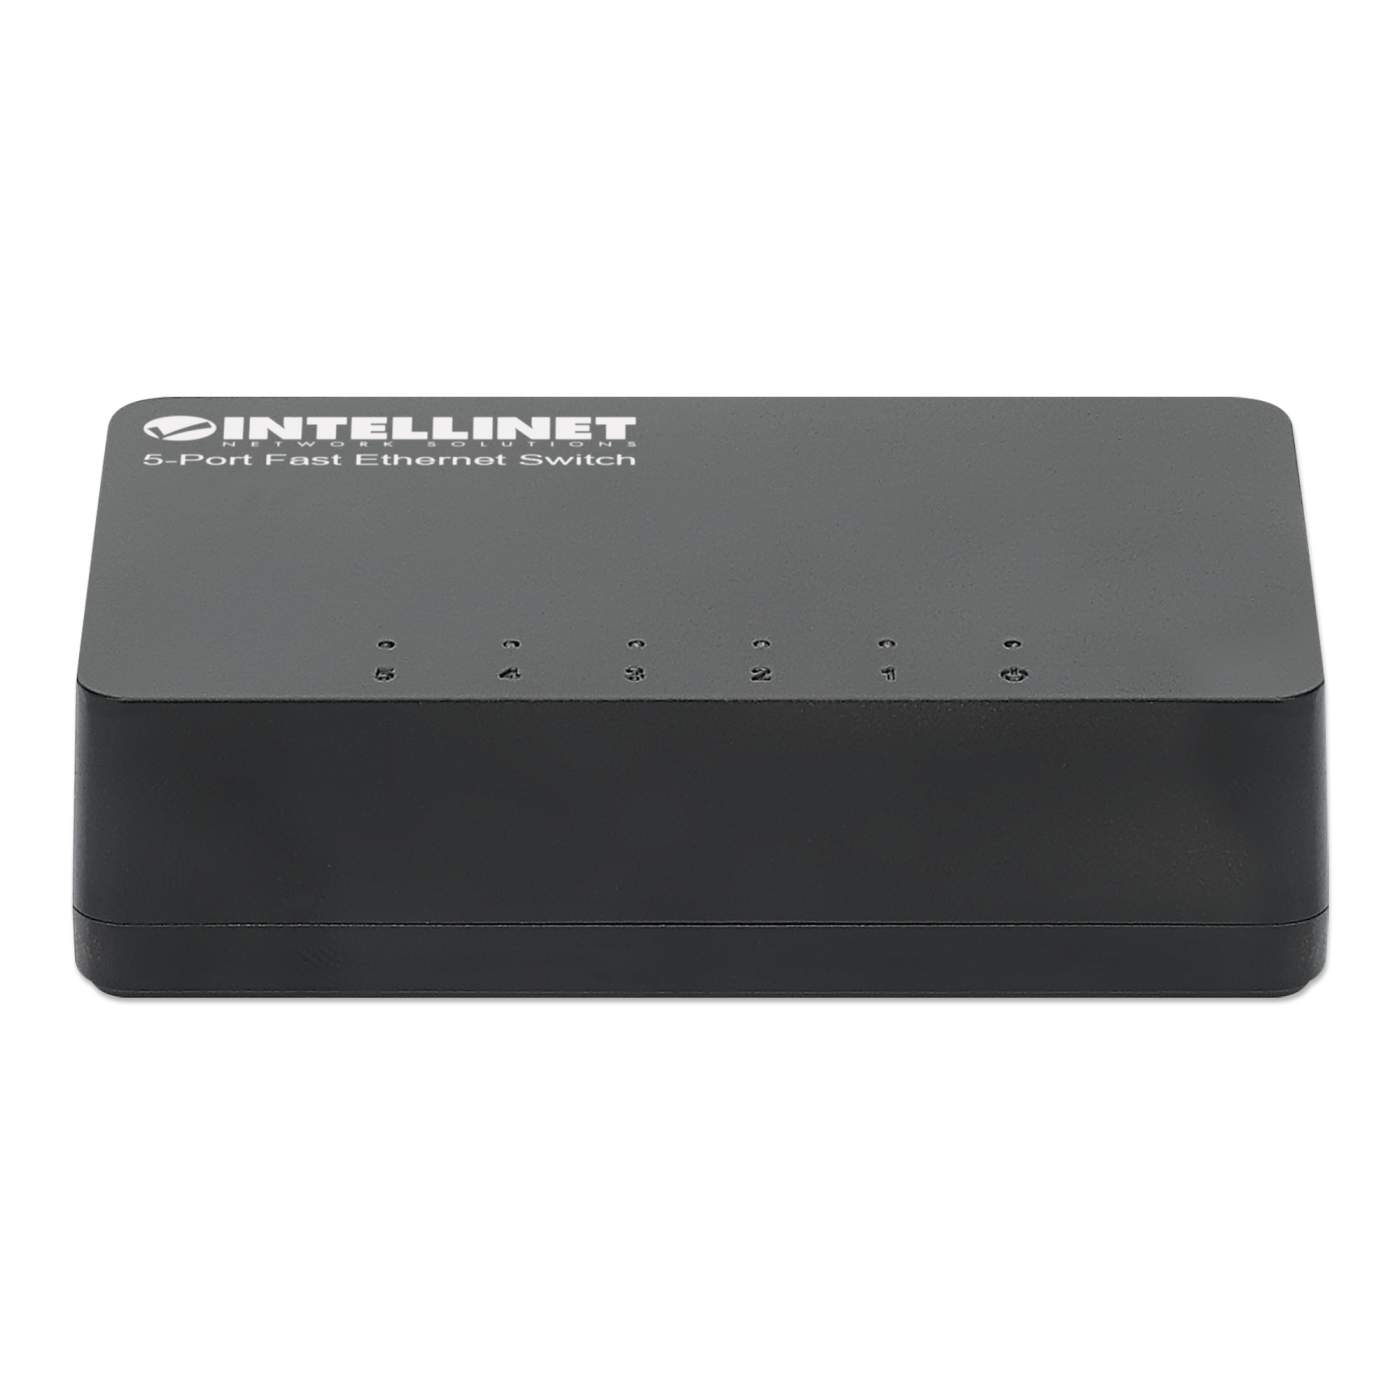 5-Port Fast Ethernet Switch Image 4